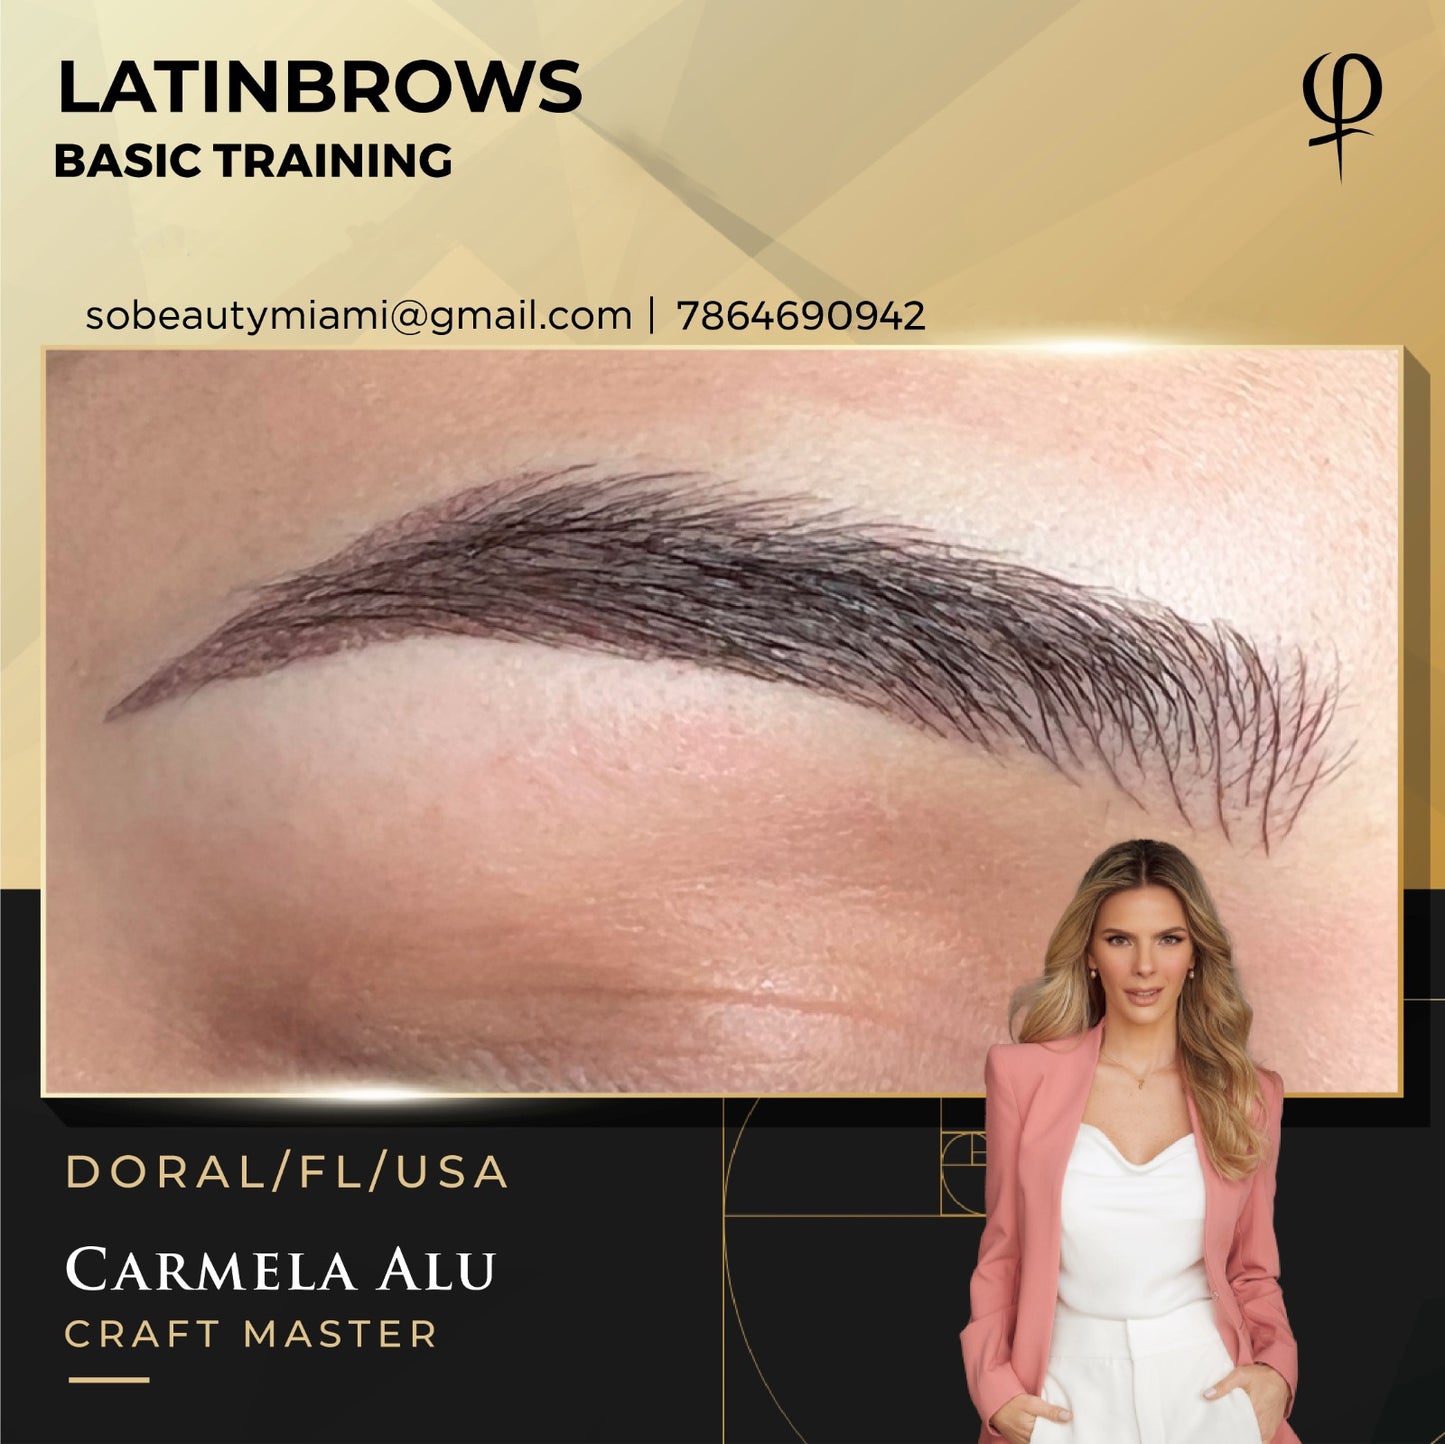 LatinBrows In-Person Course December 4 and 5 PhiAcademy